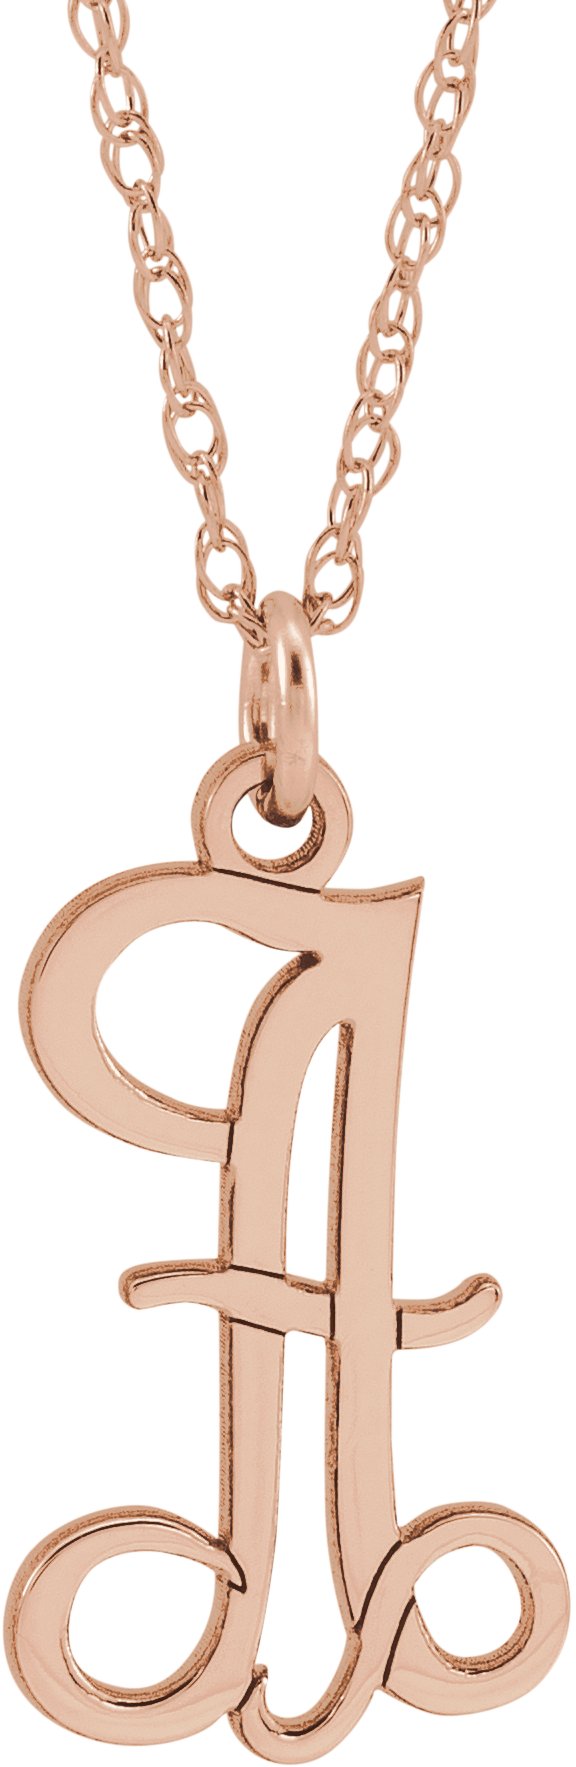 14K Rose Gold-Plated Sterling Silver Script Initial A 16-18" Necklace